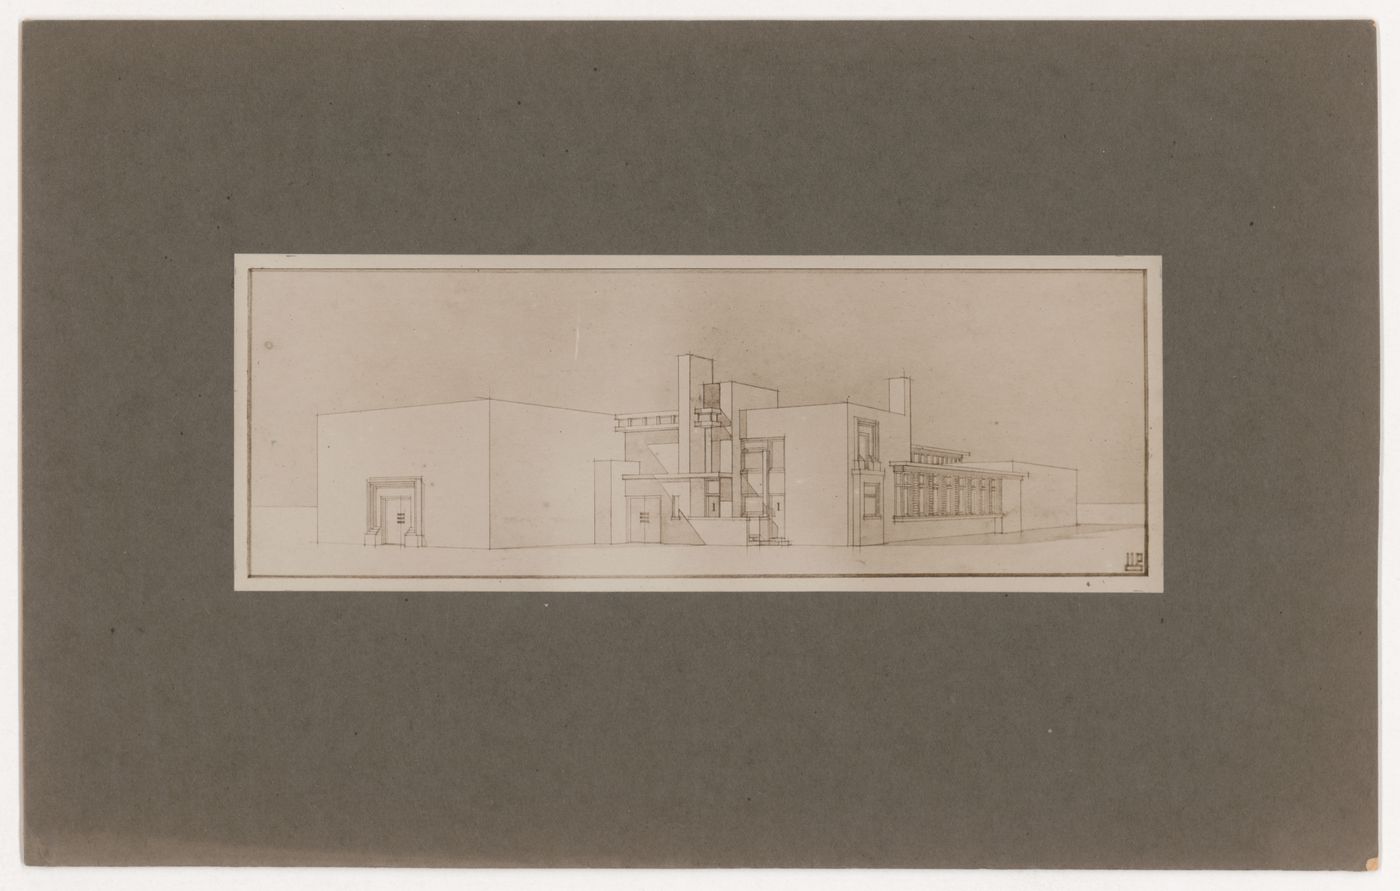 Photograph of a perspective drawing for a winery, Purmerend, Netherlands